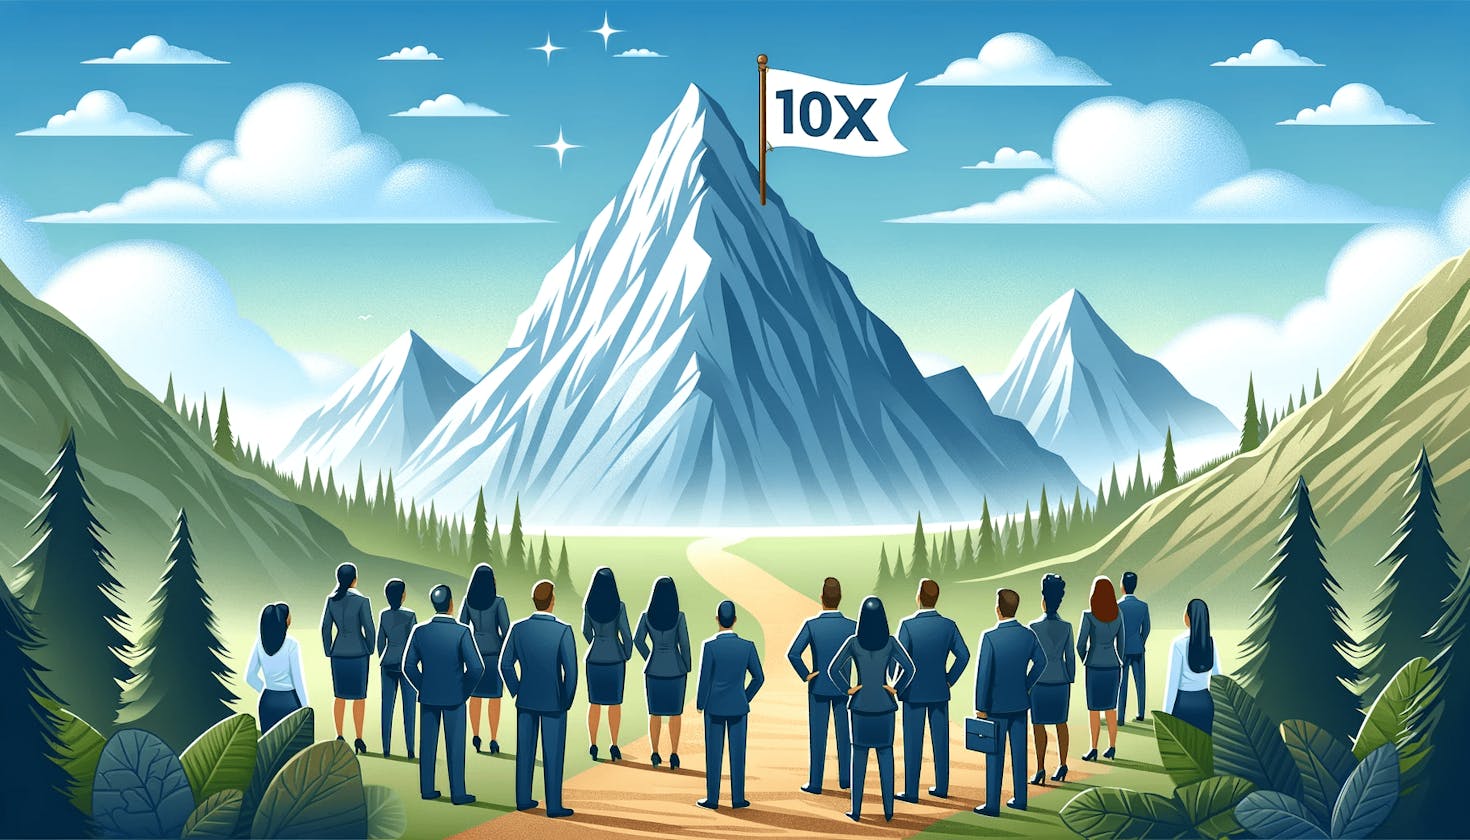 The philosophy of the 10X way